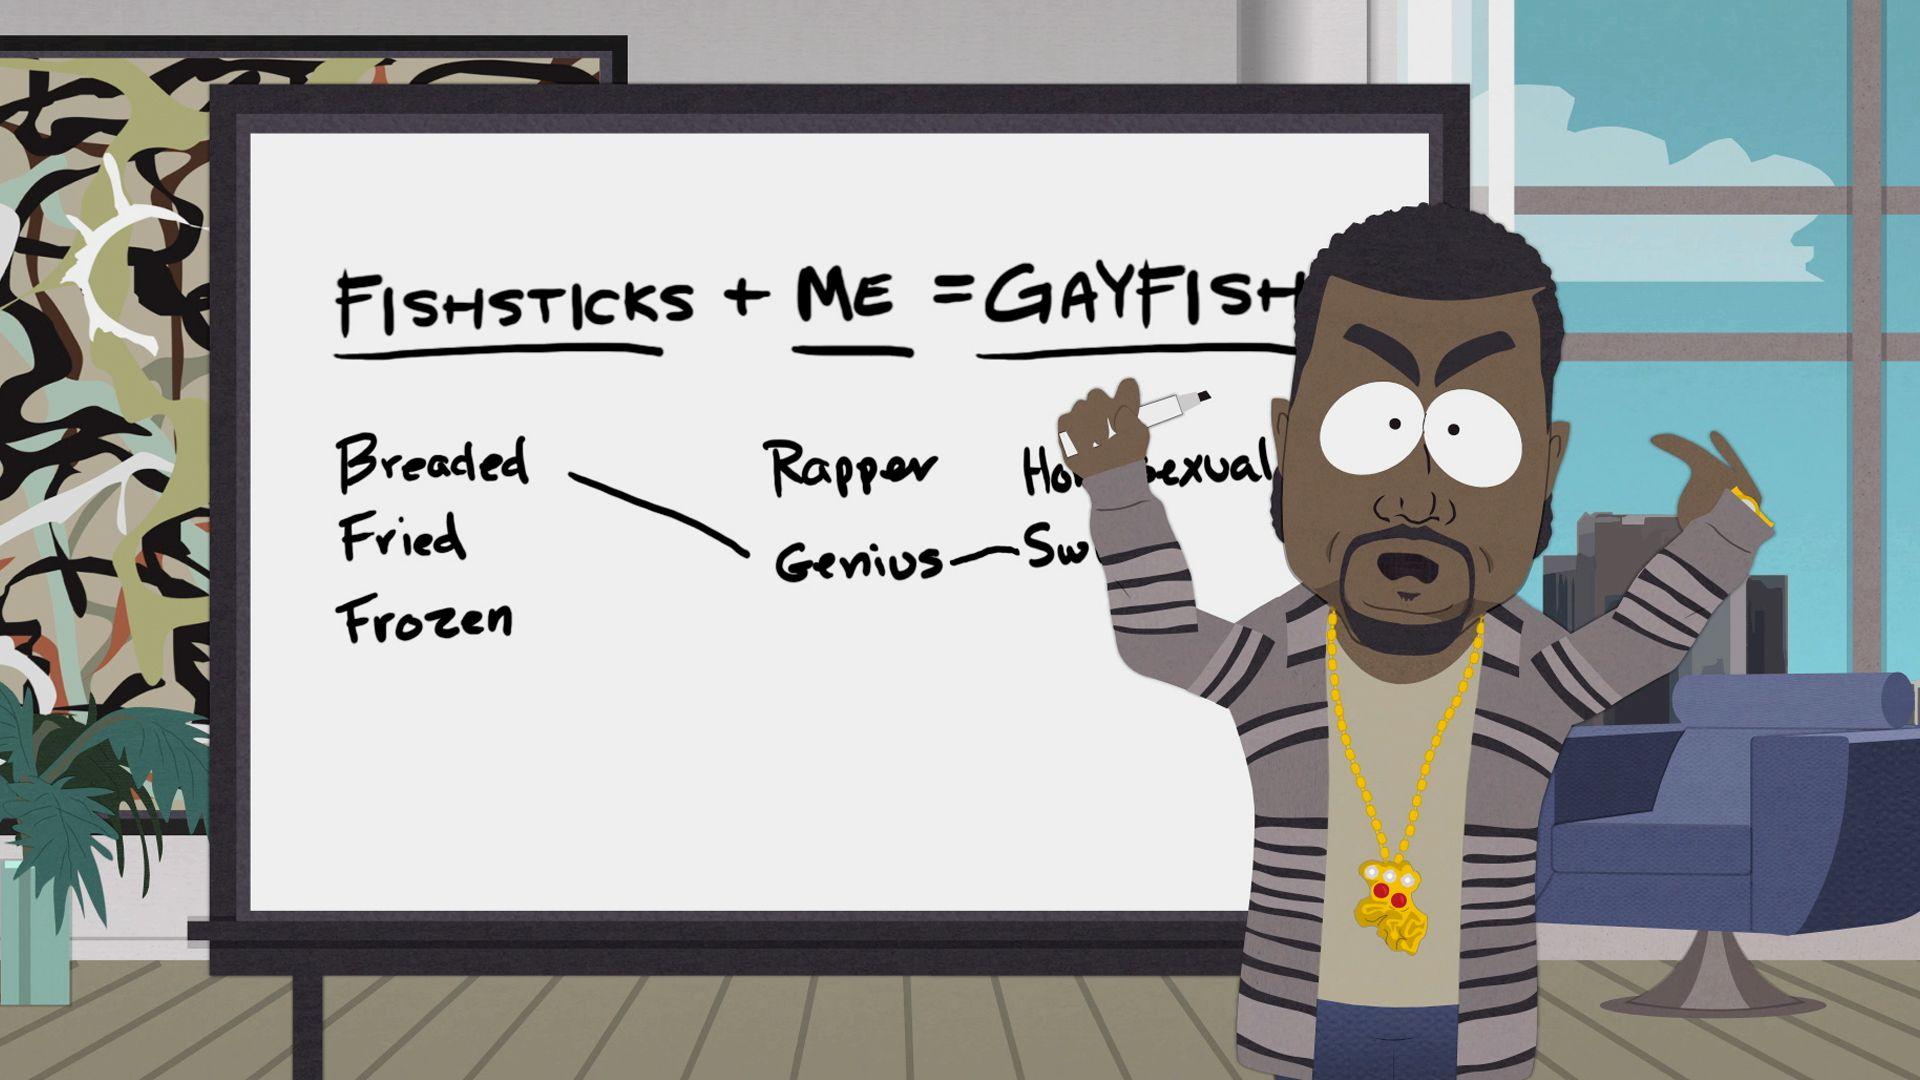 best of Of fish Pic kanye west gay